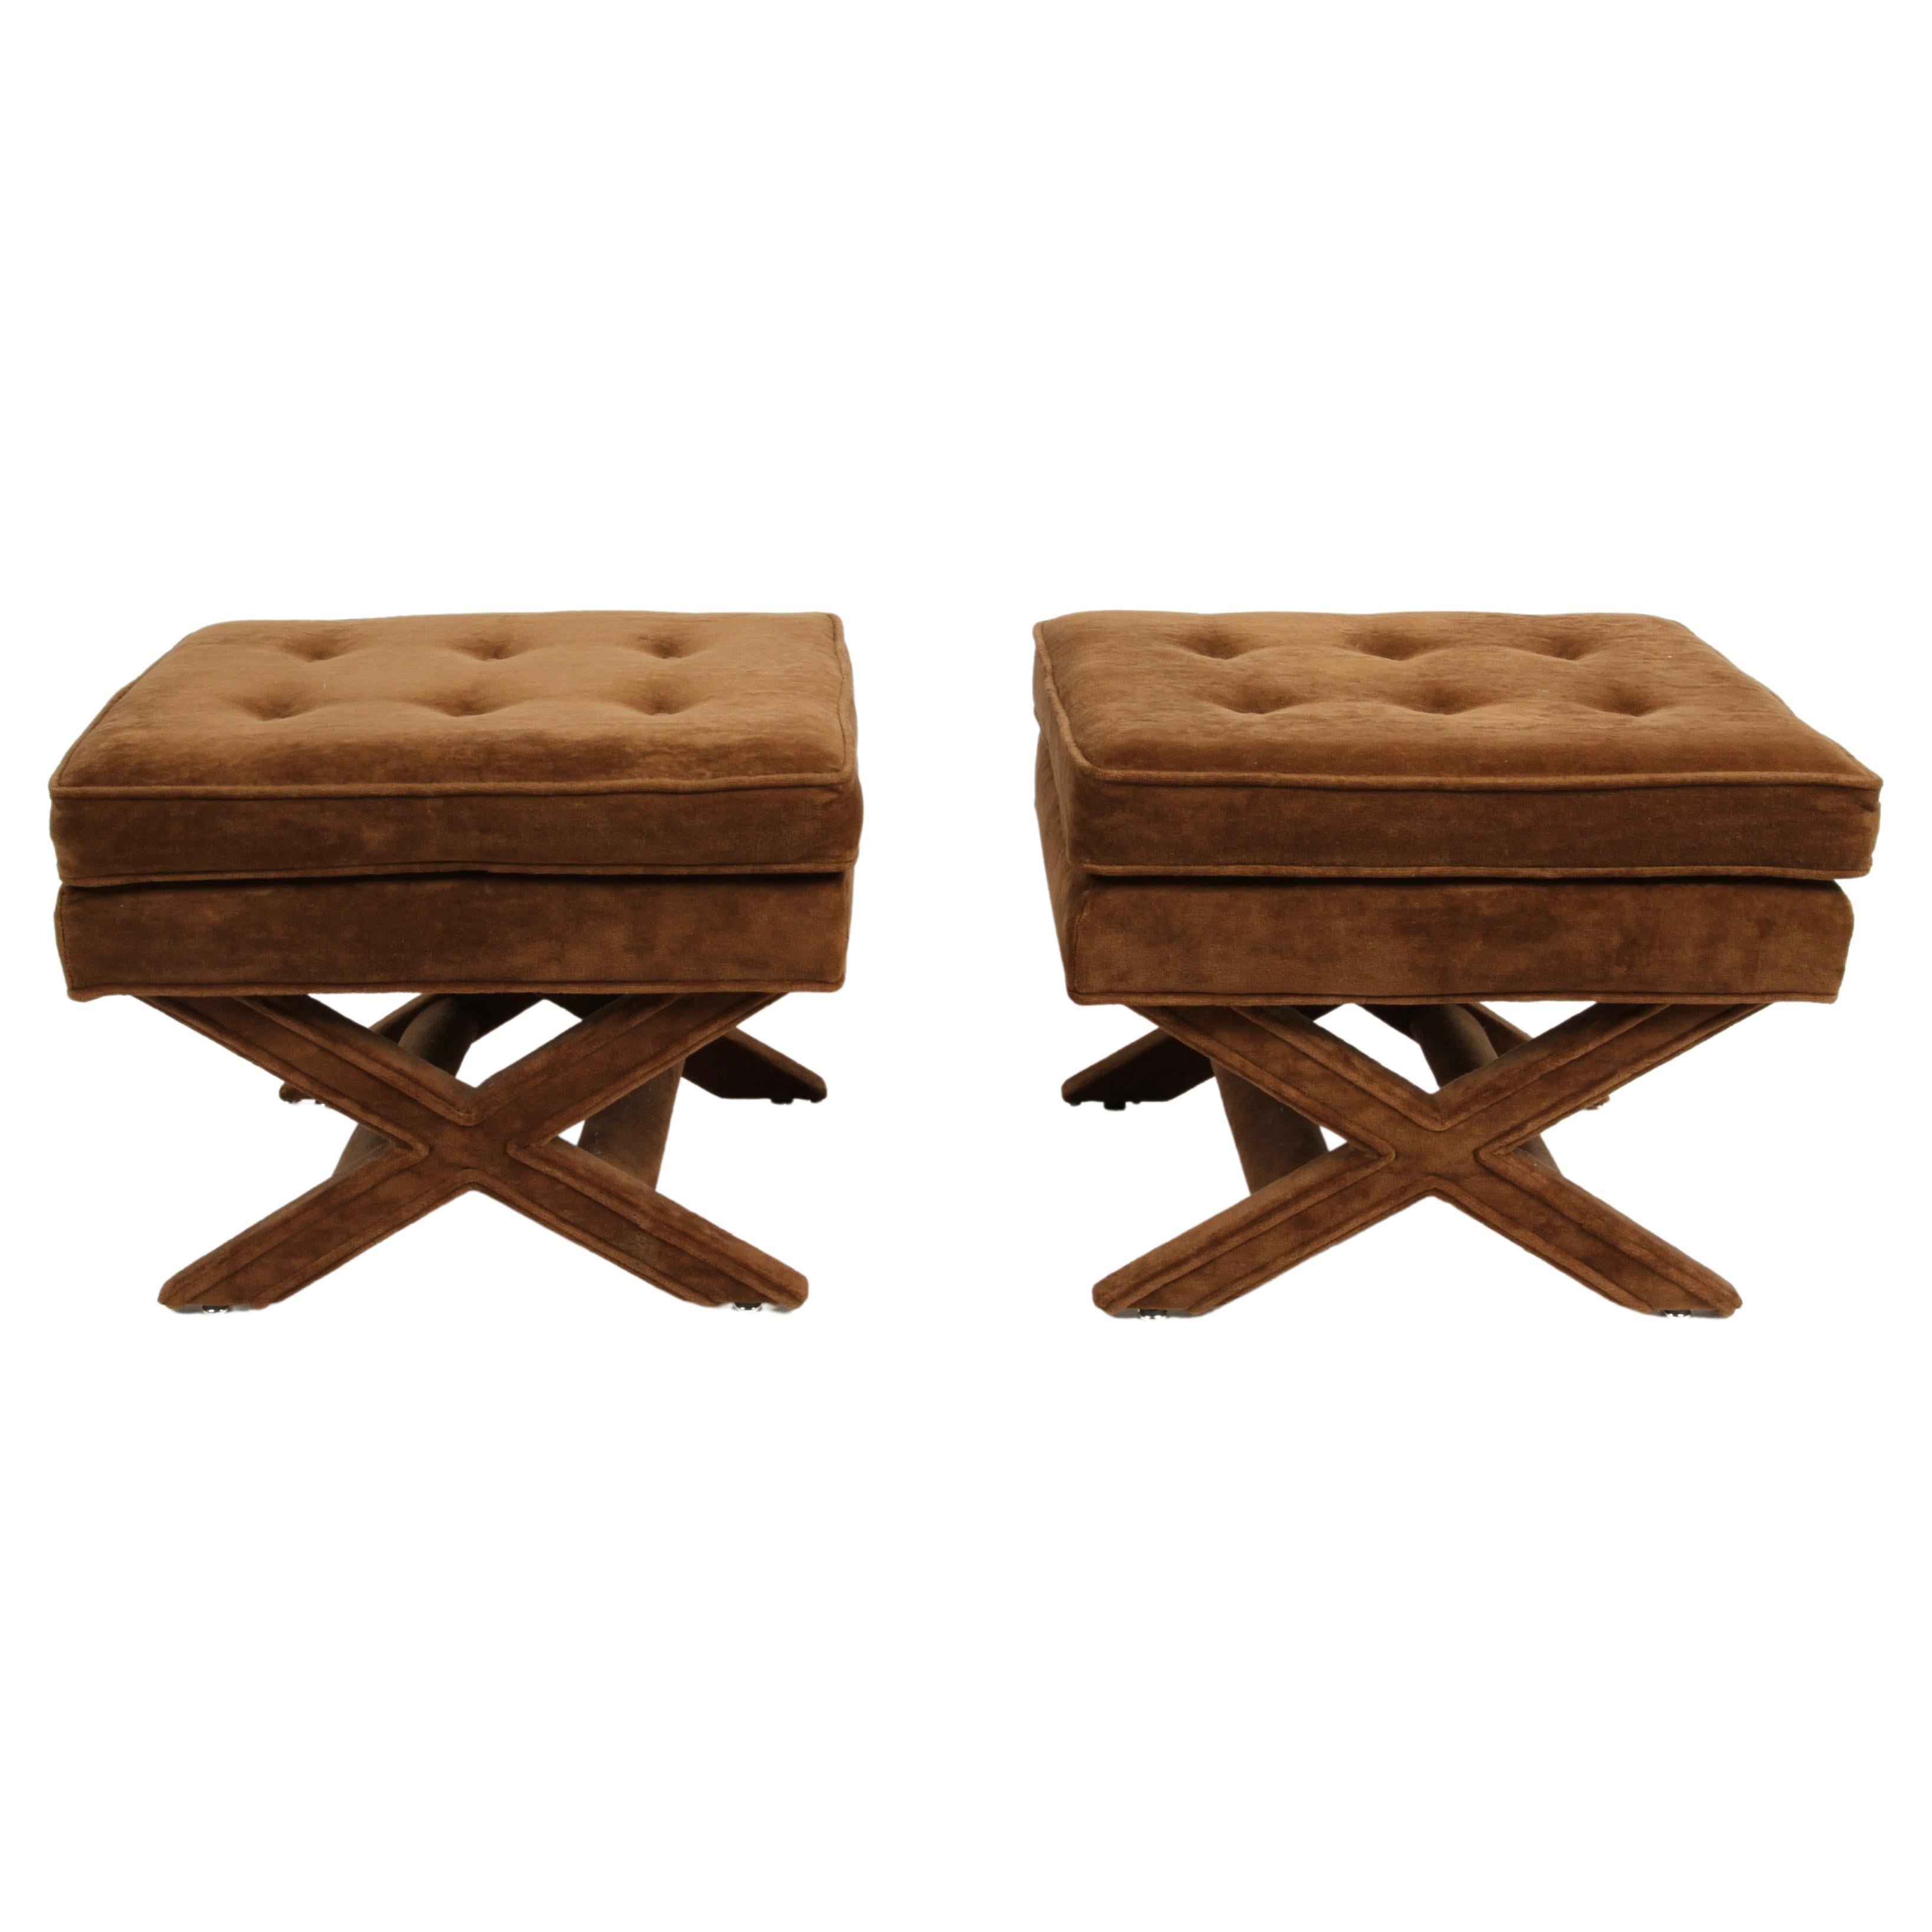 Pair of 1970s Billy Baldwin Style Brown Velvet Upholstered x Stools or Ottomans For Sale